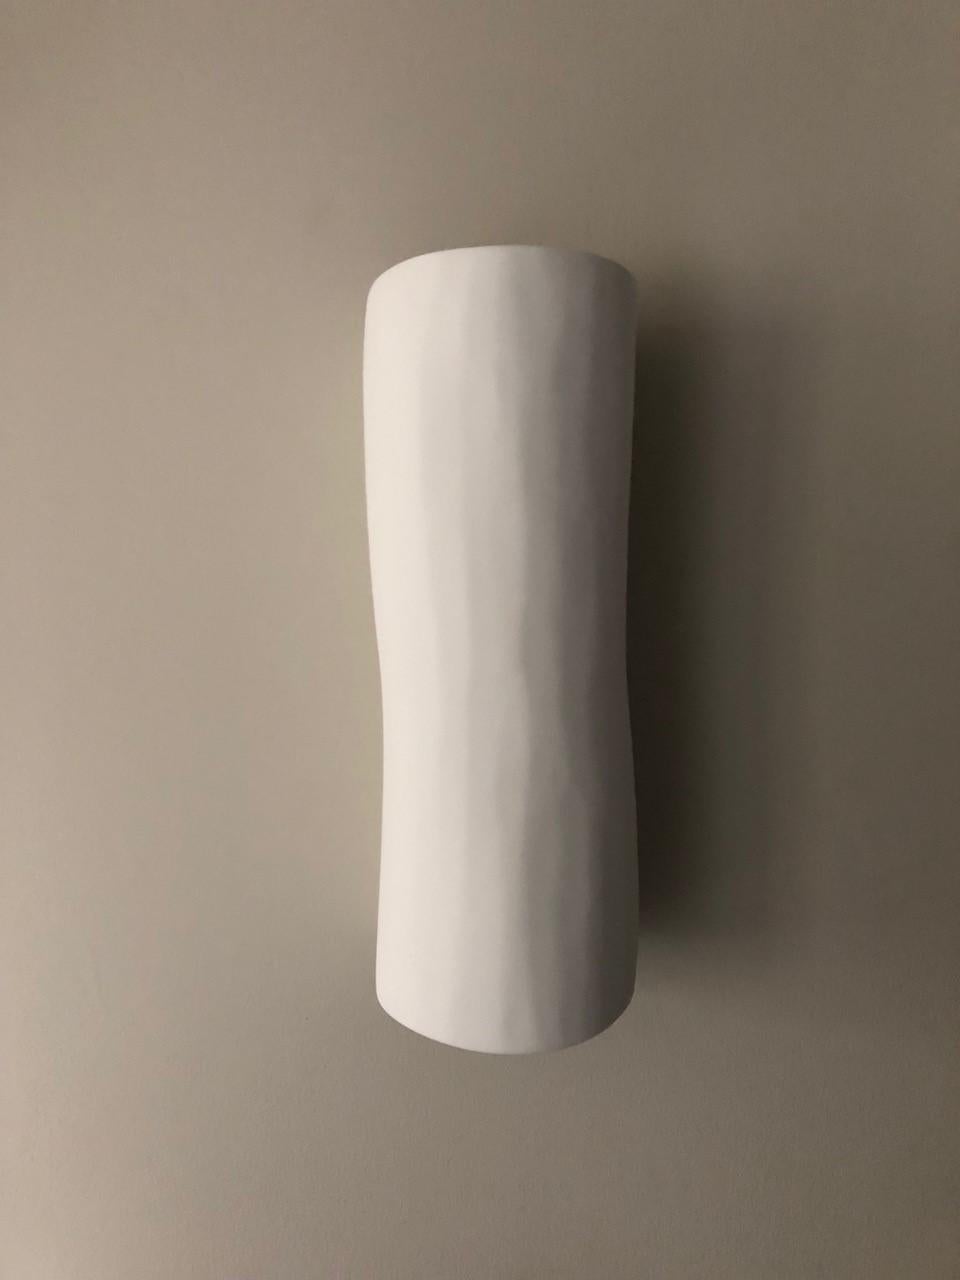 Molded Serenity Sofie Contemporary Wall Sconce/Light, White Plaster, Hannah Woodhouse For Sale